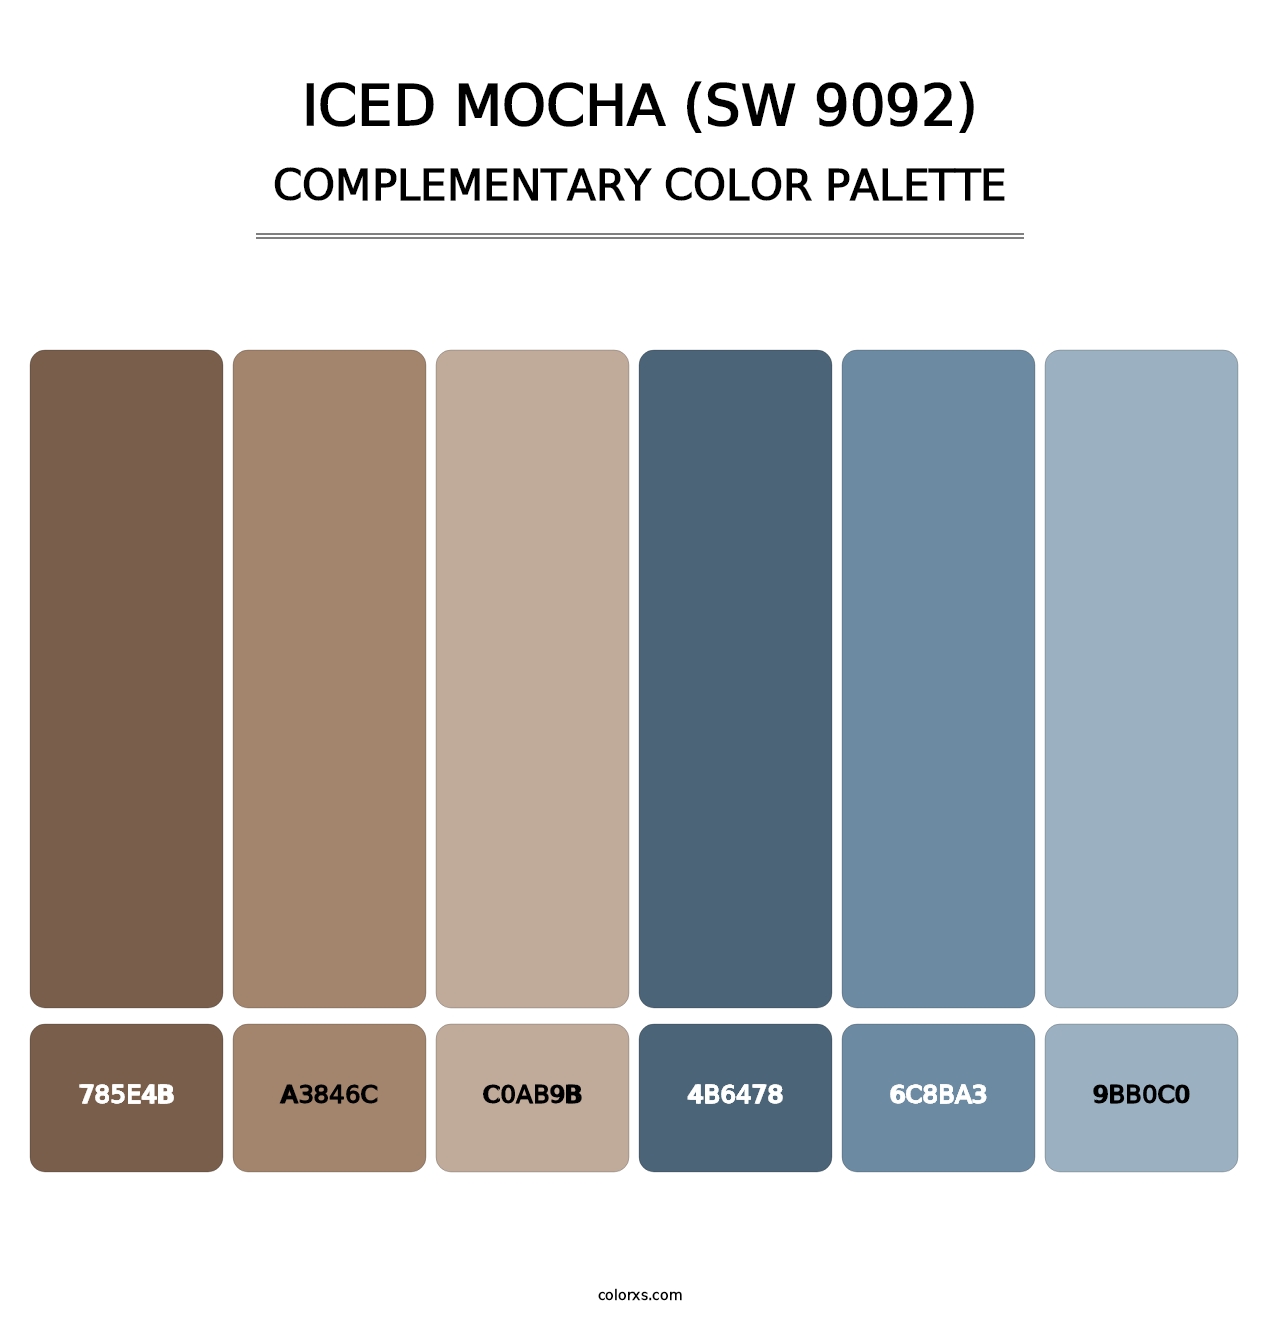 Iced Mocha (SW 9092) - Complementary Color Palette